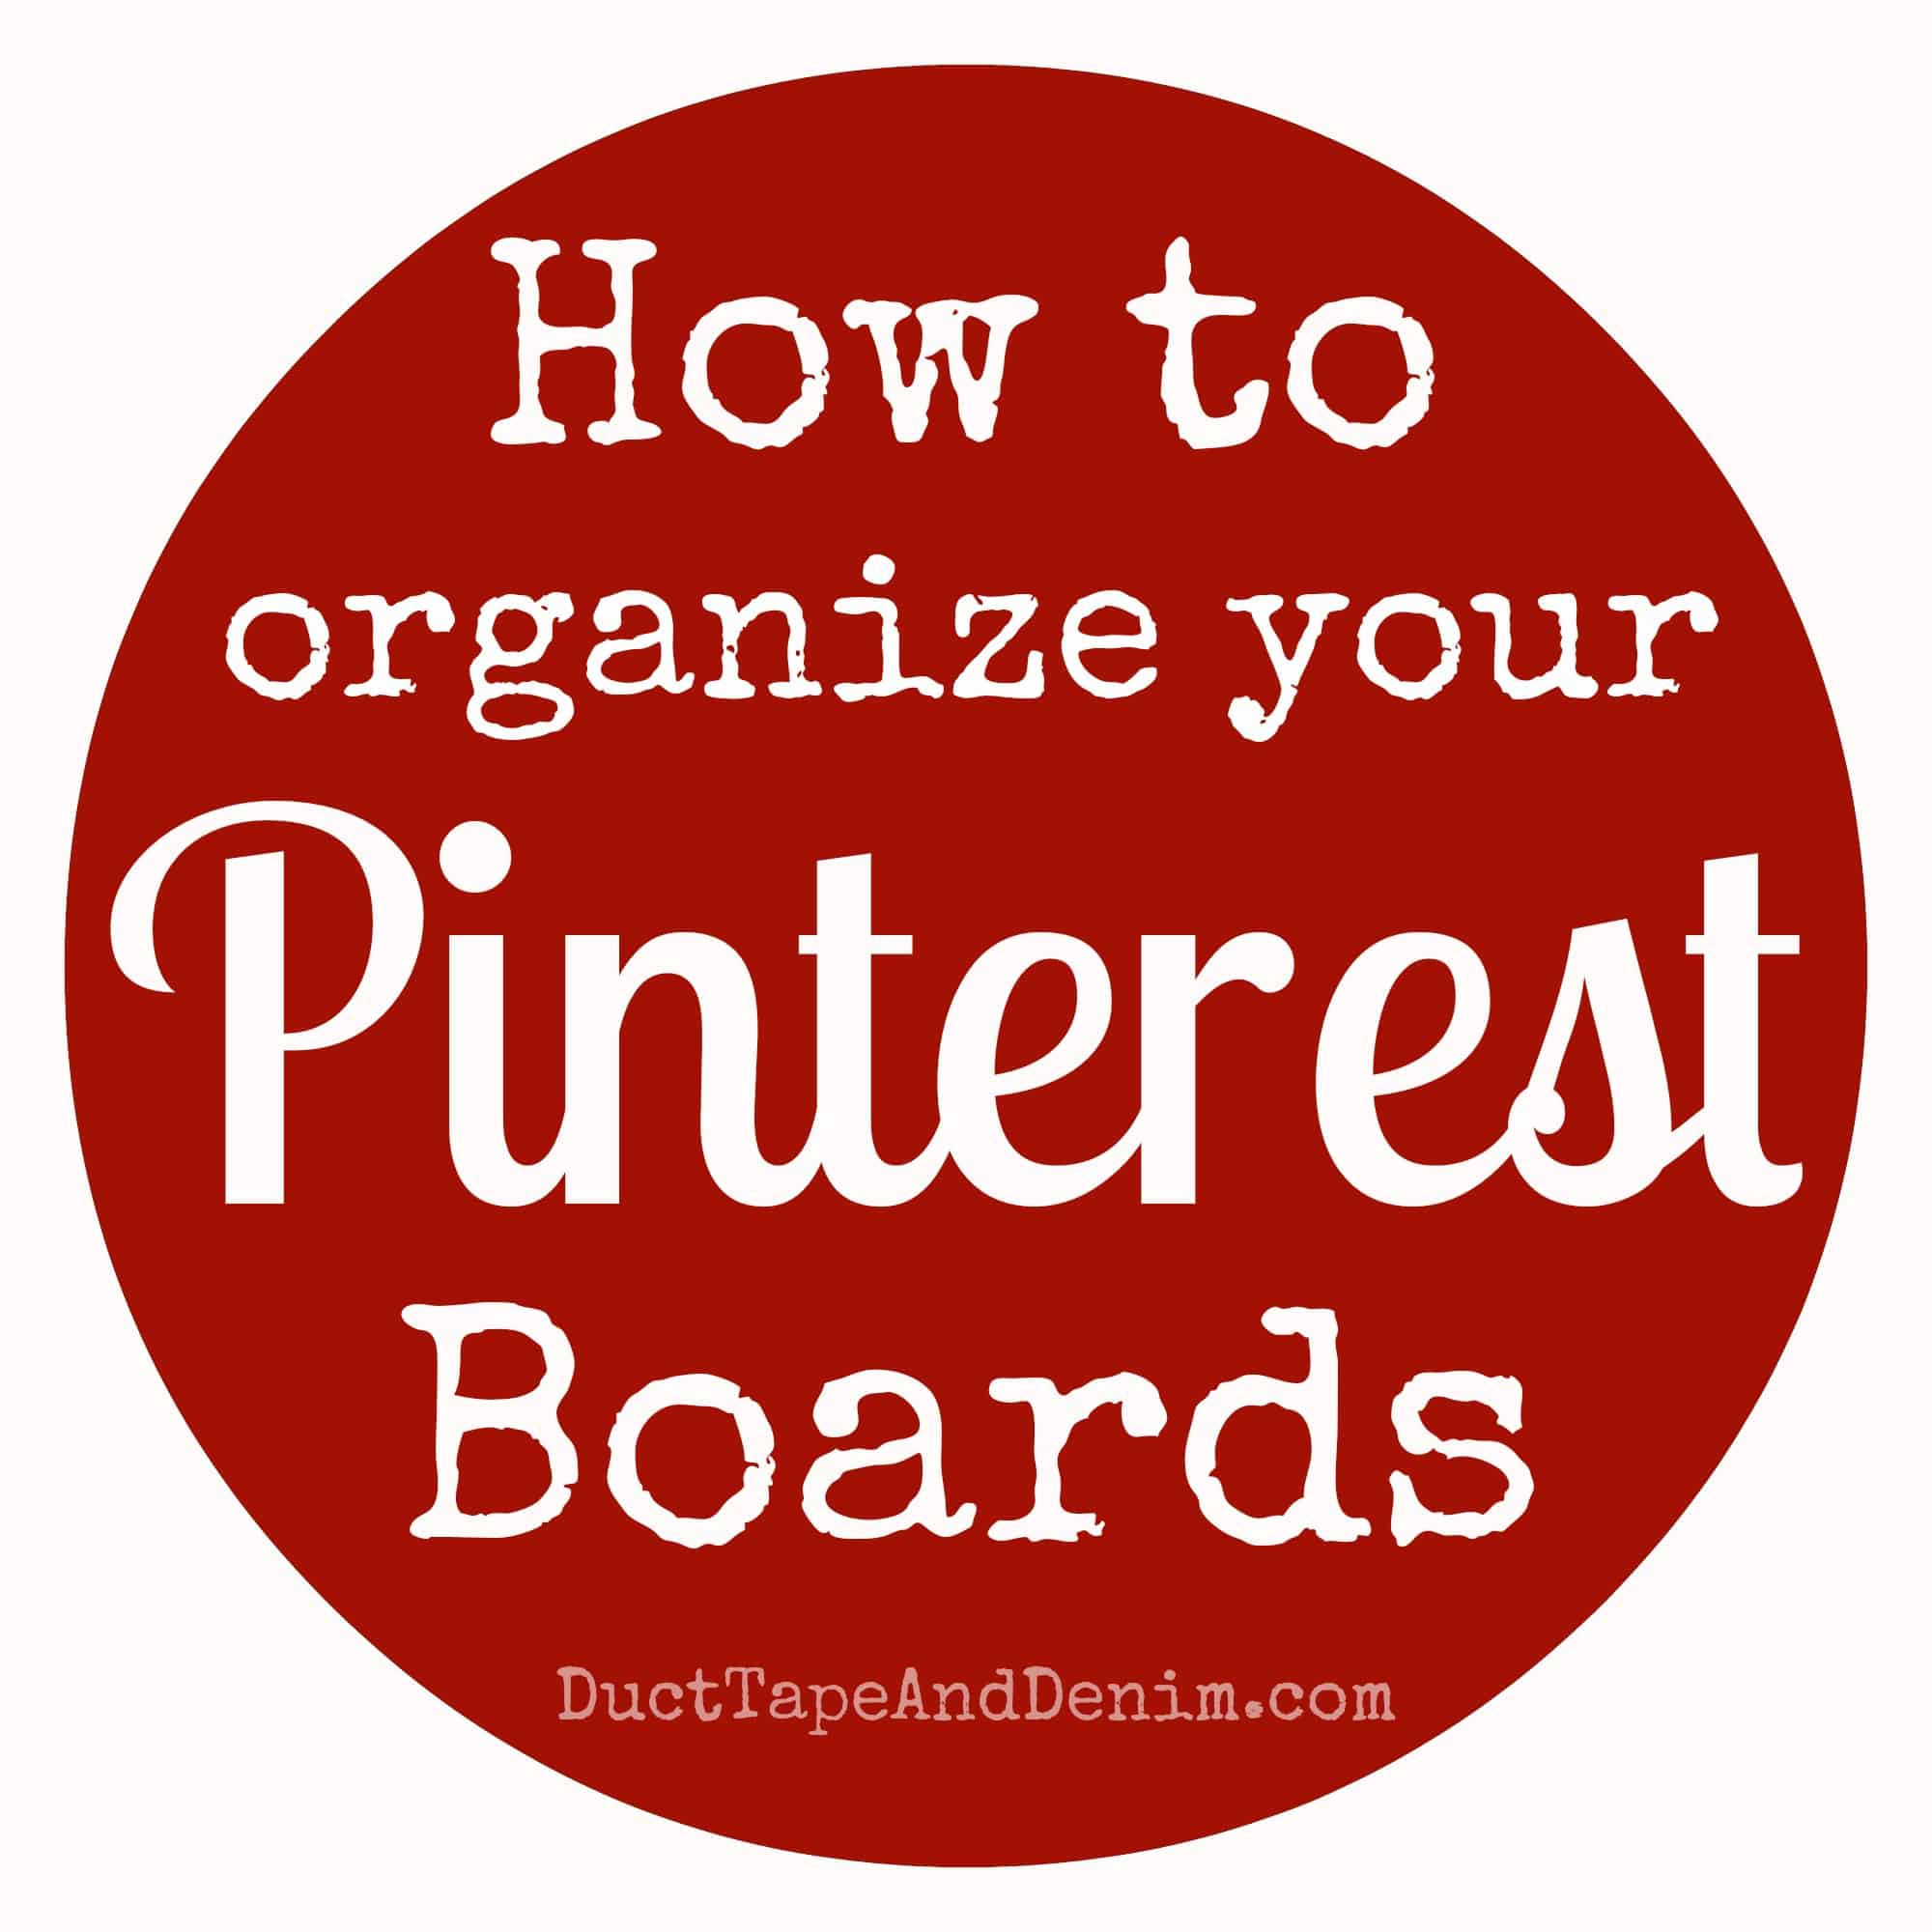 How To Organize Your Pinterest Boards DuctTapeAndDenim.com  